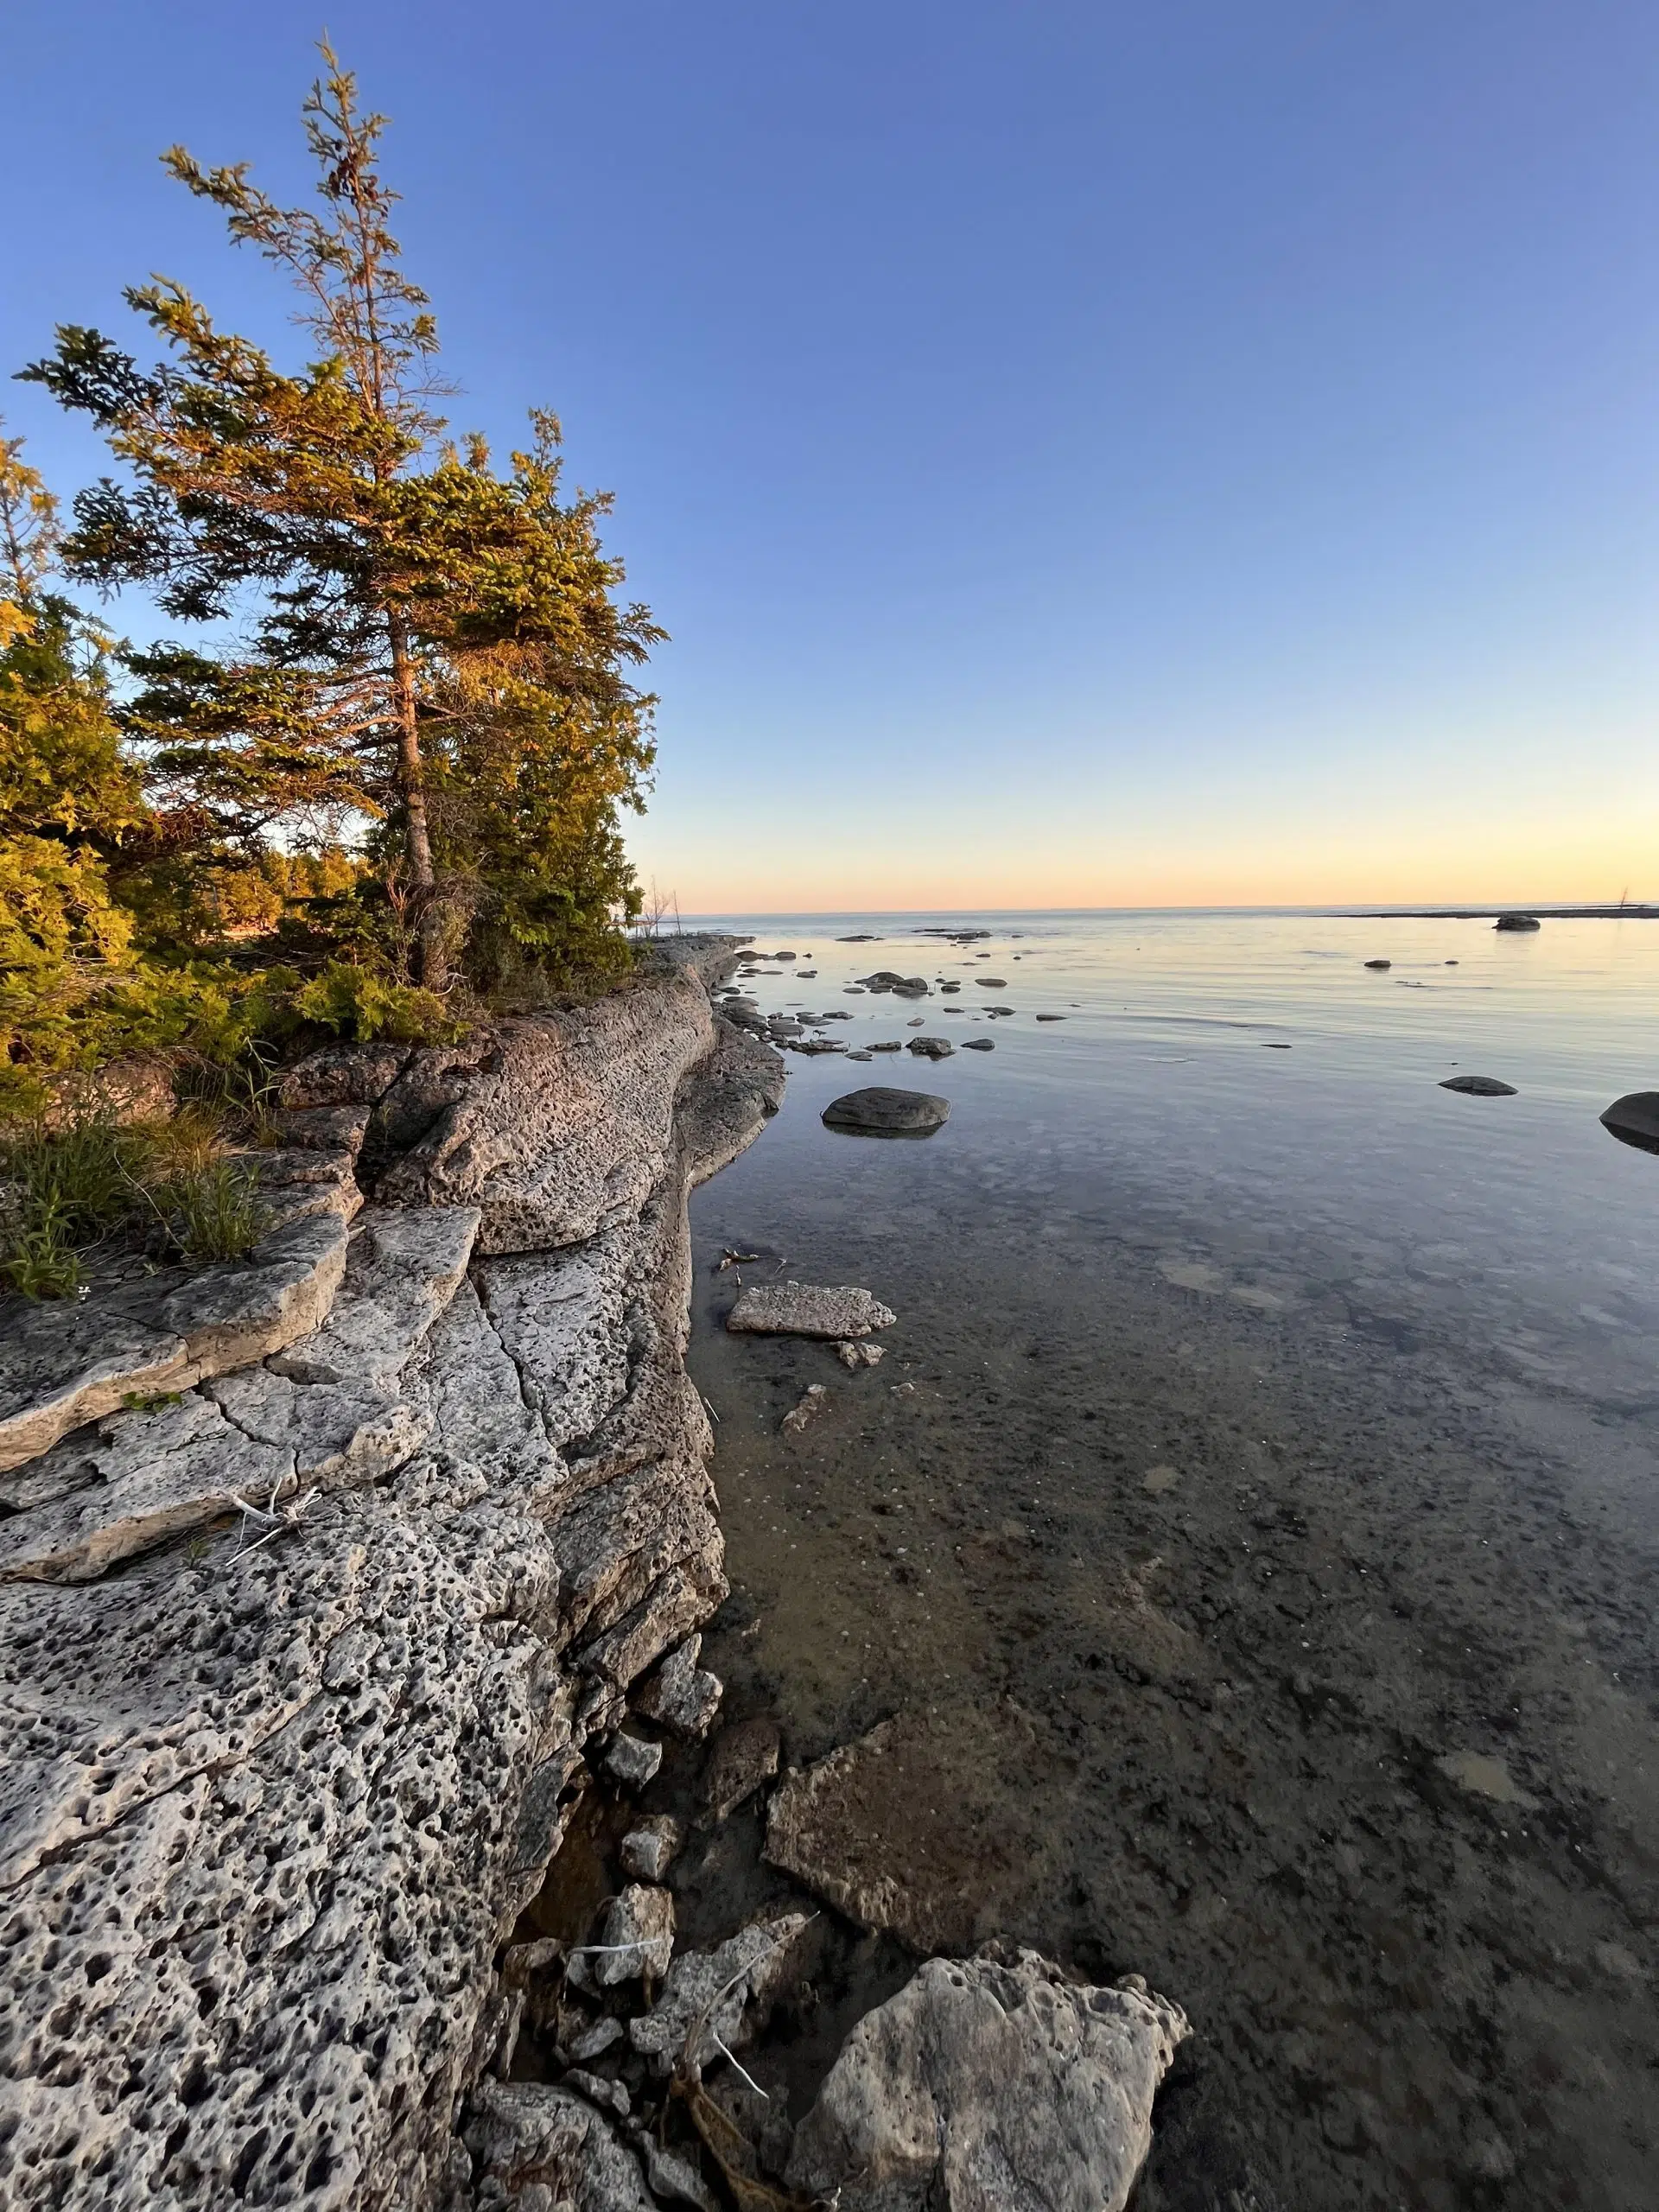 Nature Conservancy Purchases 24-Hectare Property Near Tobermory